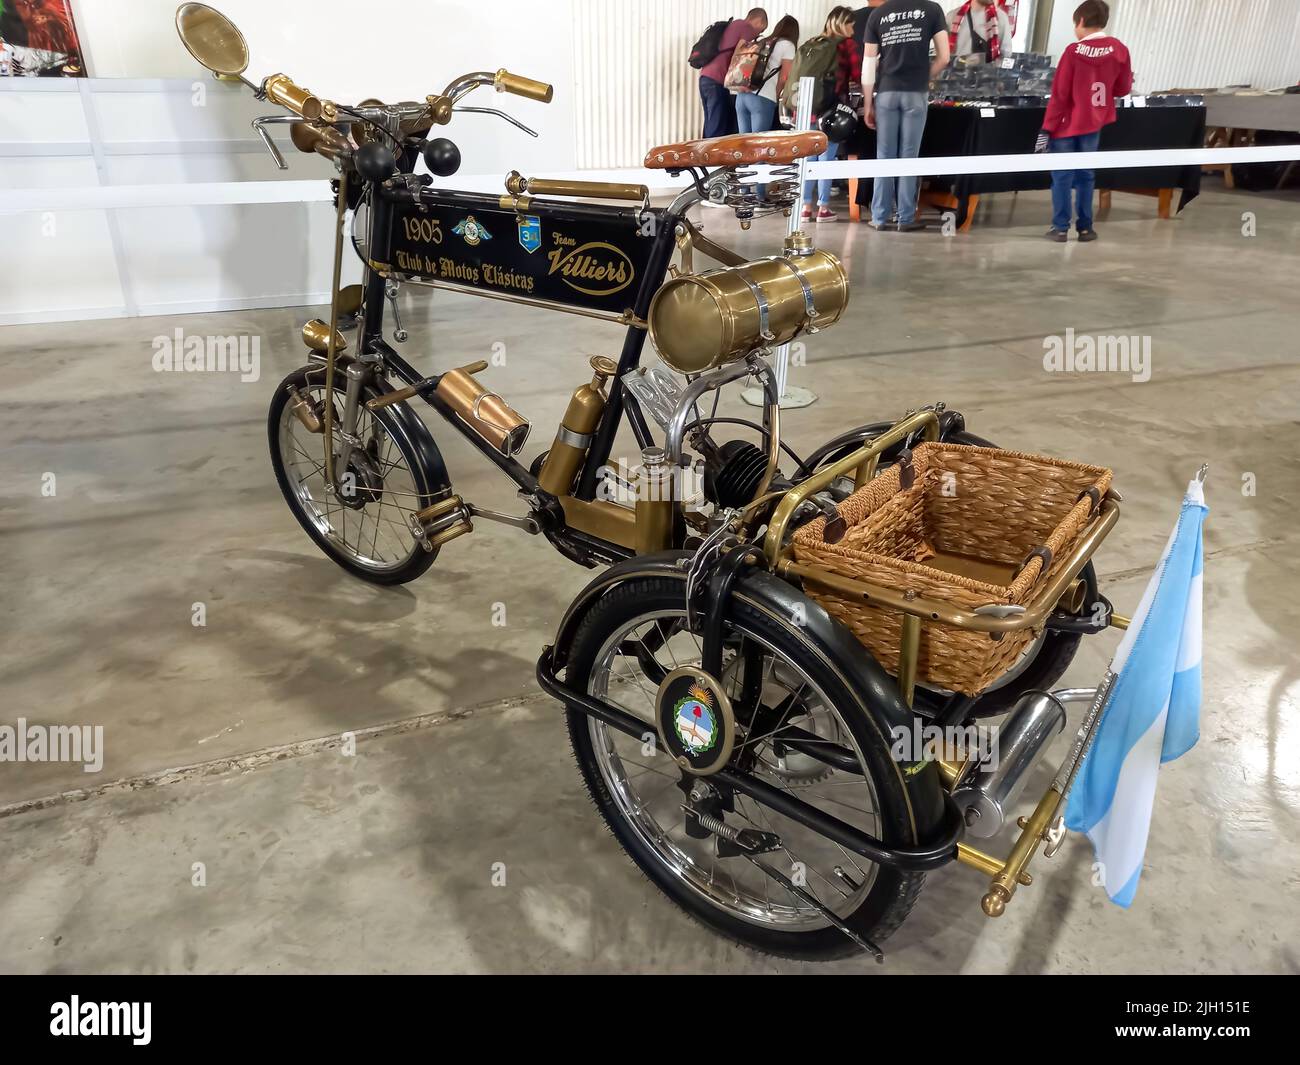 Avellaneda, Argentina - May 7, 2022: Shot of an old 1905 Villiers motorcycle cargo trike. Expo Fierro 2022 classic car show. Stock Photo